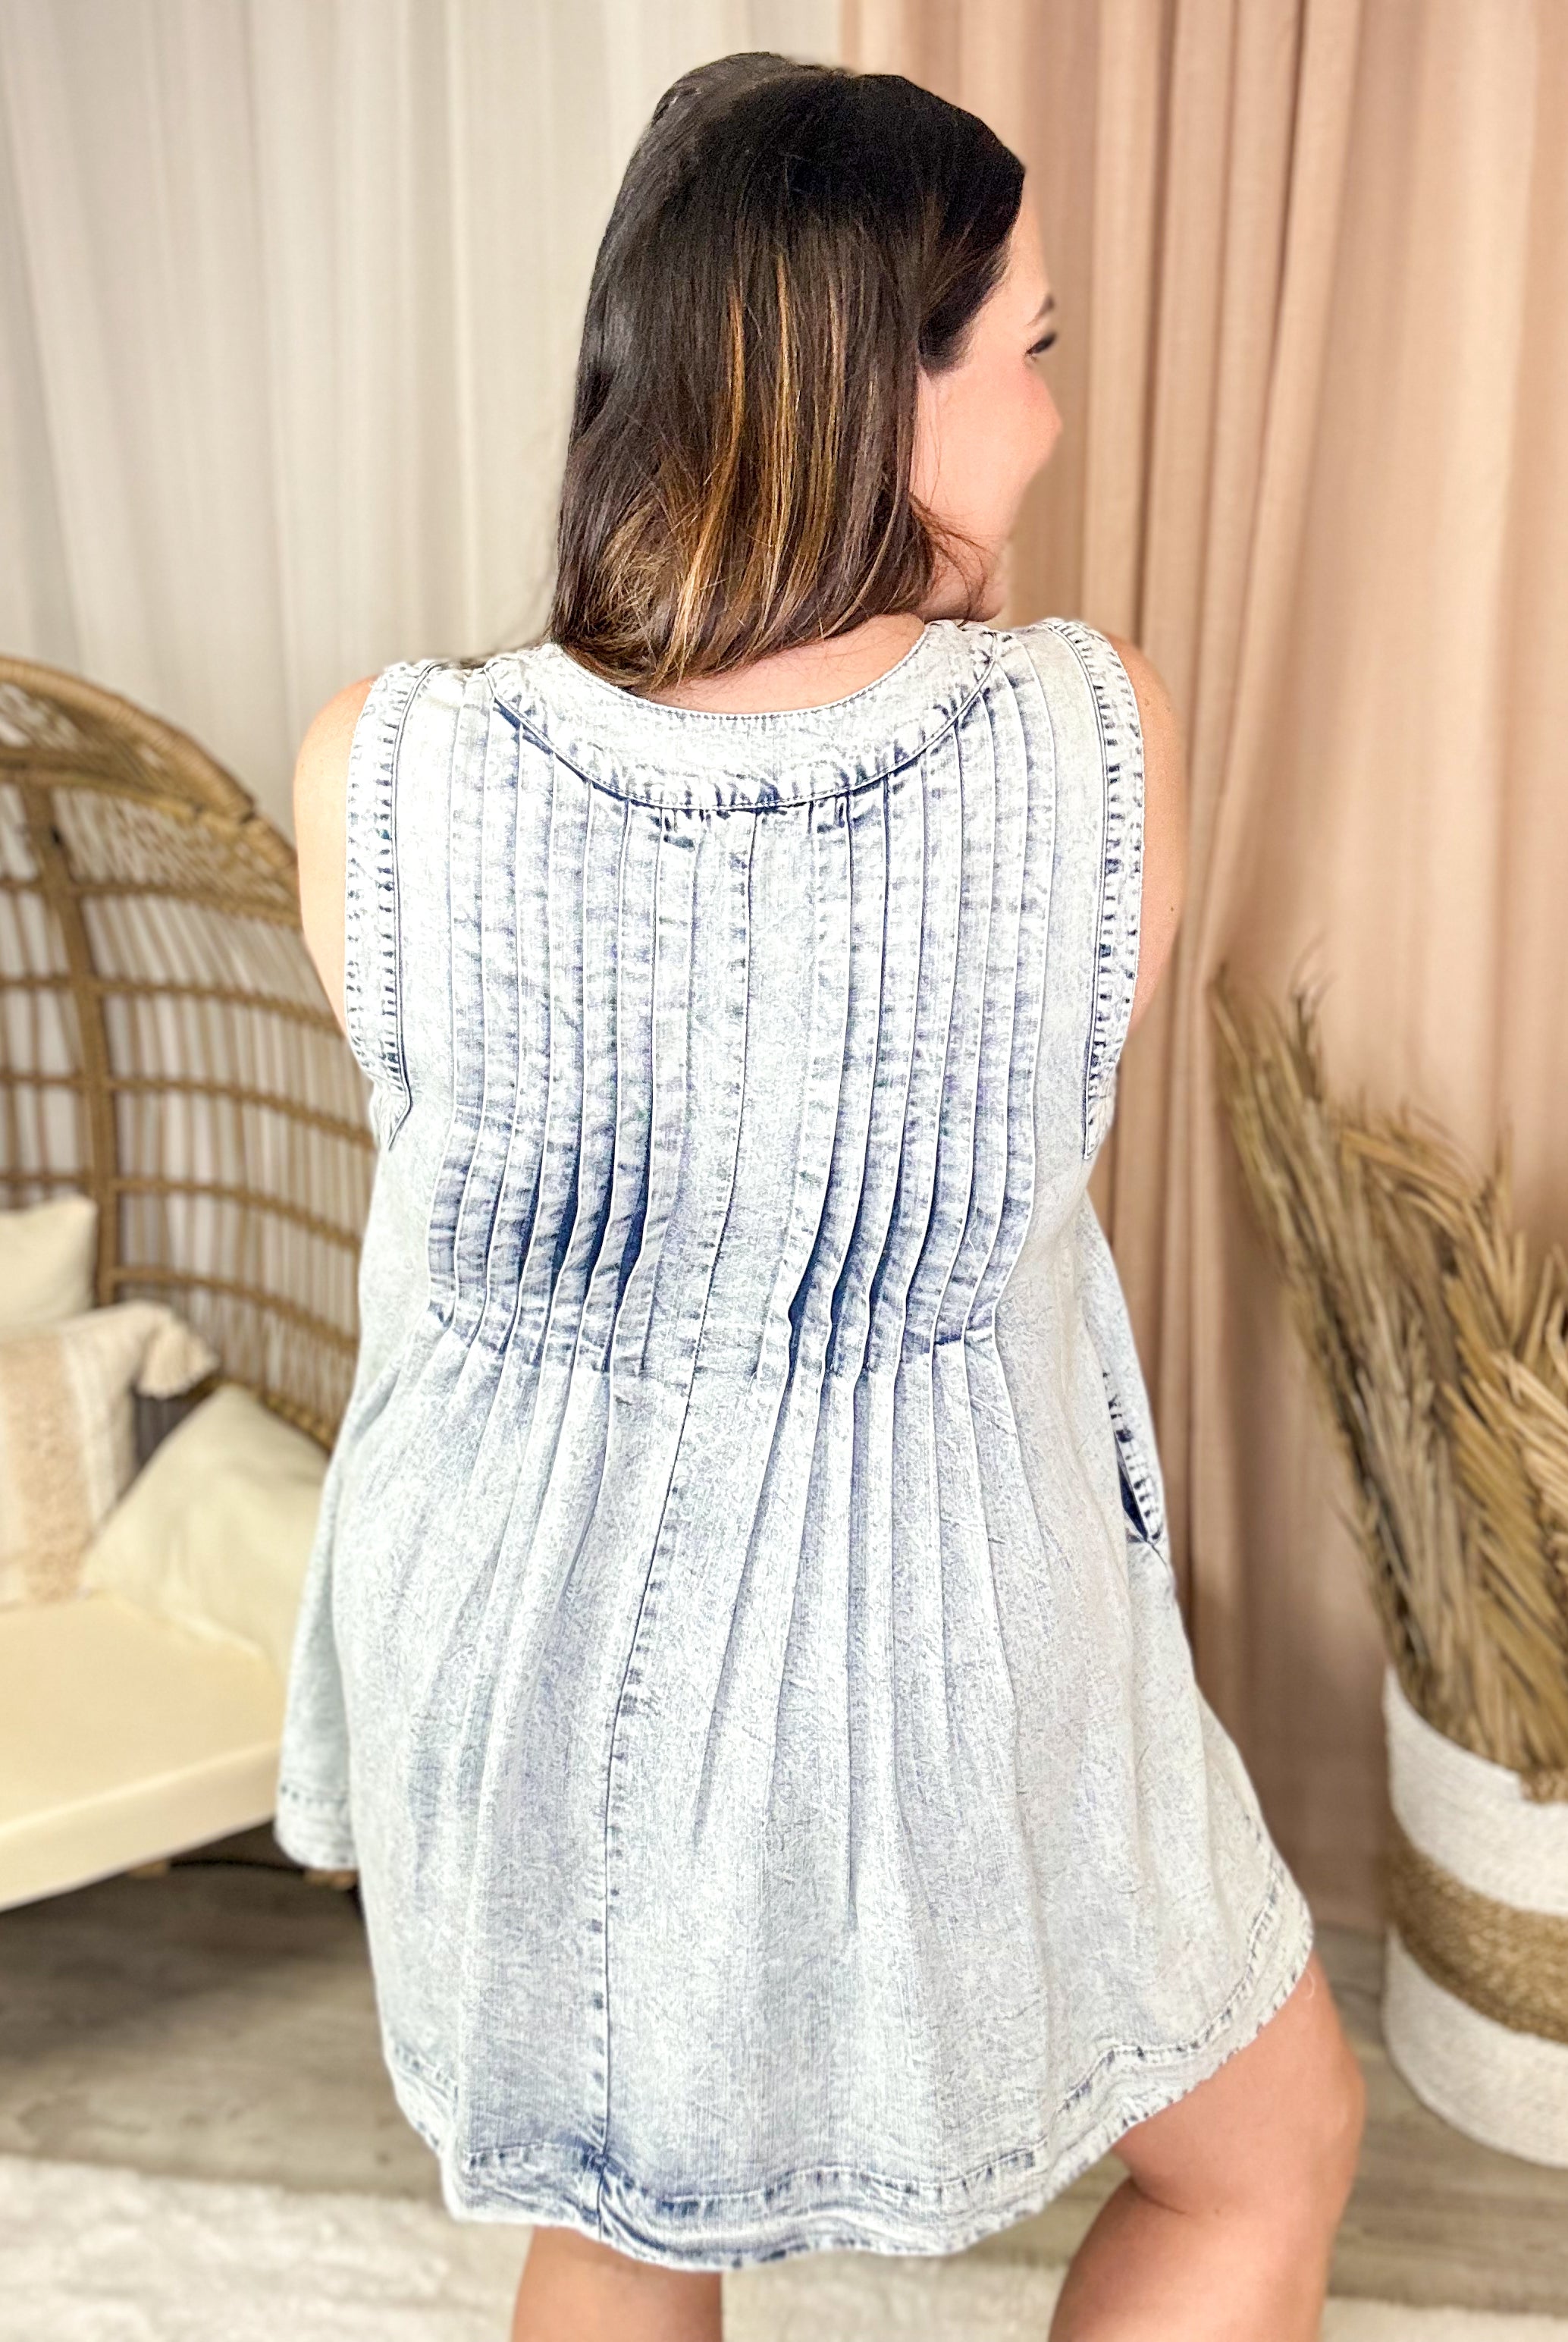 RESTOCK: Gone with the Wind Dress-230 Dresses/Jumpsuits/Rompers-BlueVelvet-Heathered Boho Boutique, Women's Fashion and Accessories in Palmetto, FL